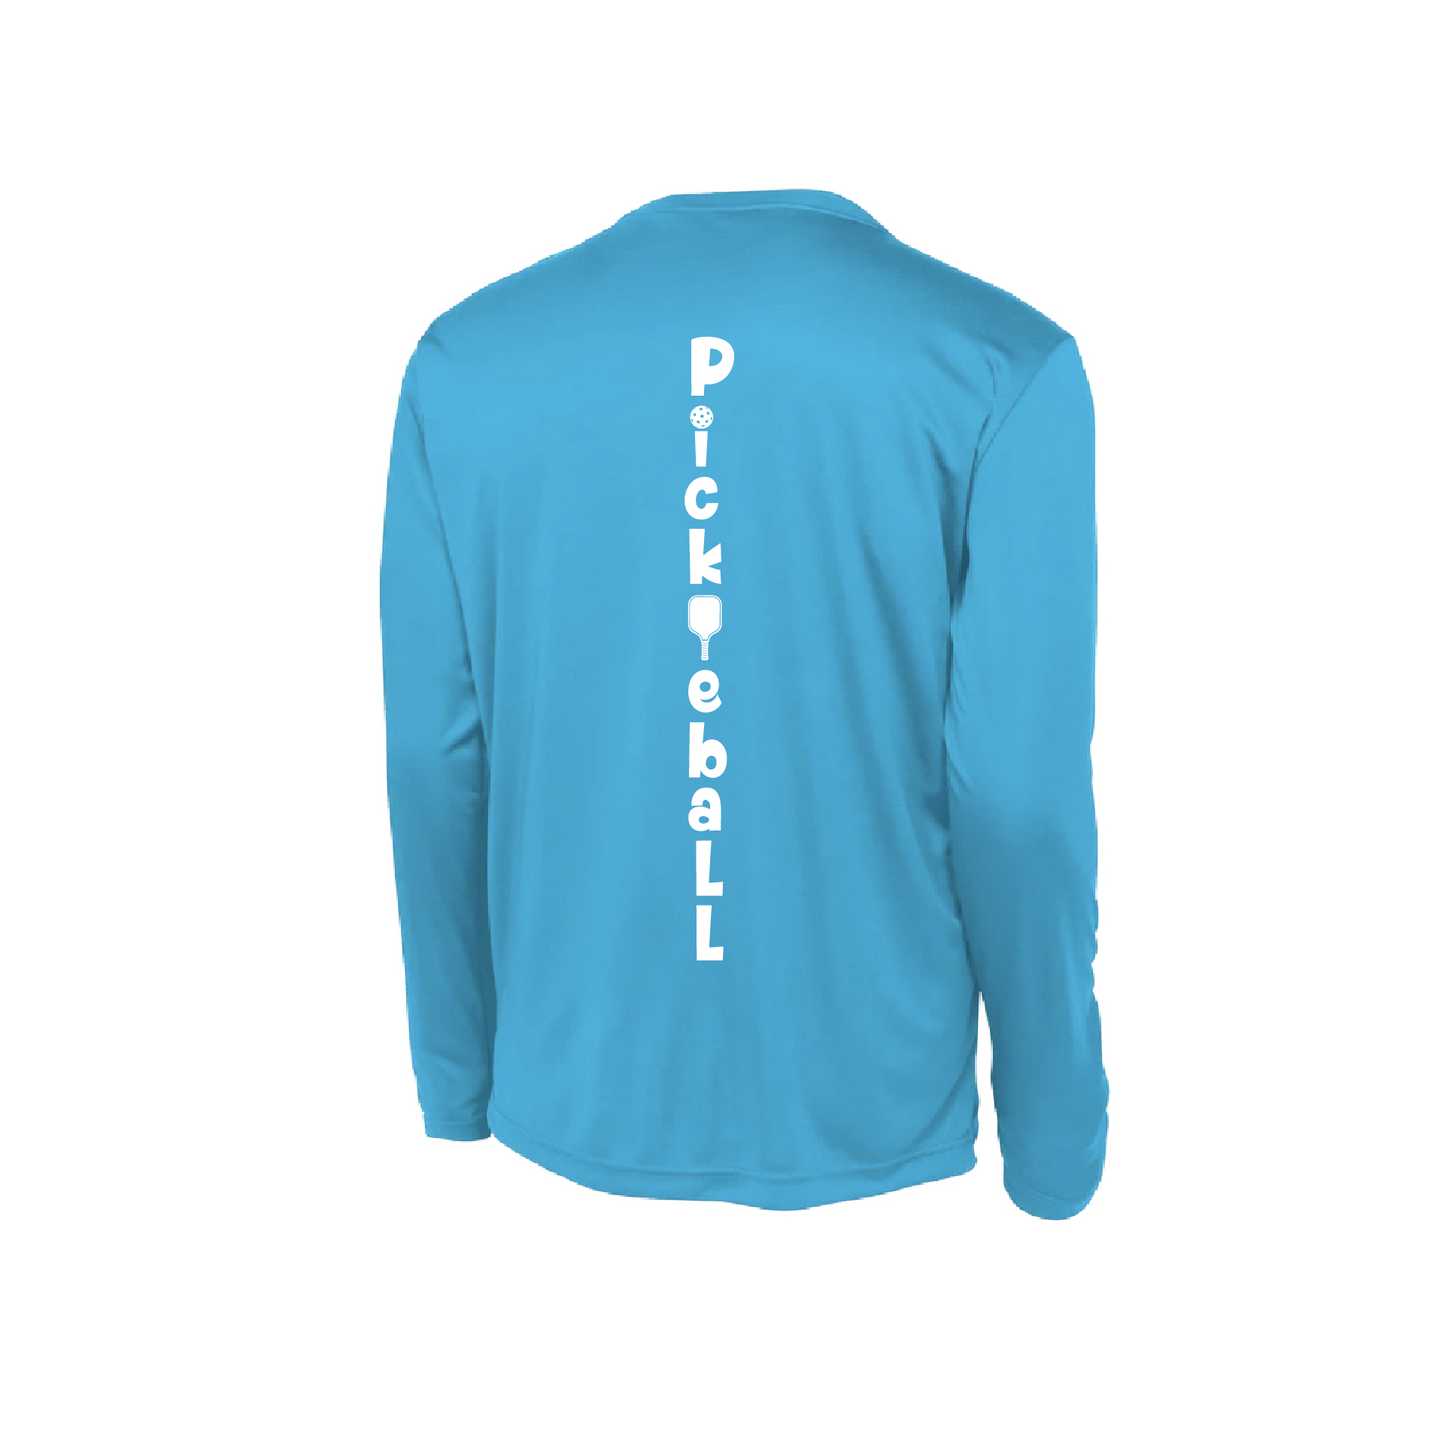 Pickleball Design: Pickleball Vertical - Customizable location  Youth Styles: Long Sleeve  Shirts are lightweight, roomy and highly breathable. These moisture-wicking shirts are designed for athletic performance. They feature PosiCharge technology to lock in color and prevent logos from fading. Removable tag and set-in sleeves for comfort.